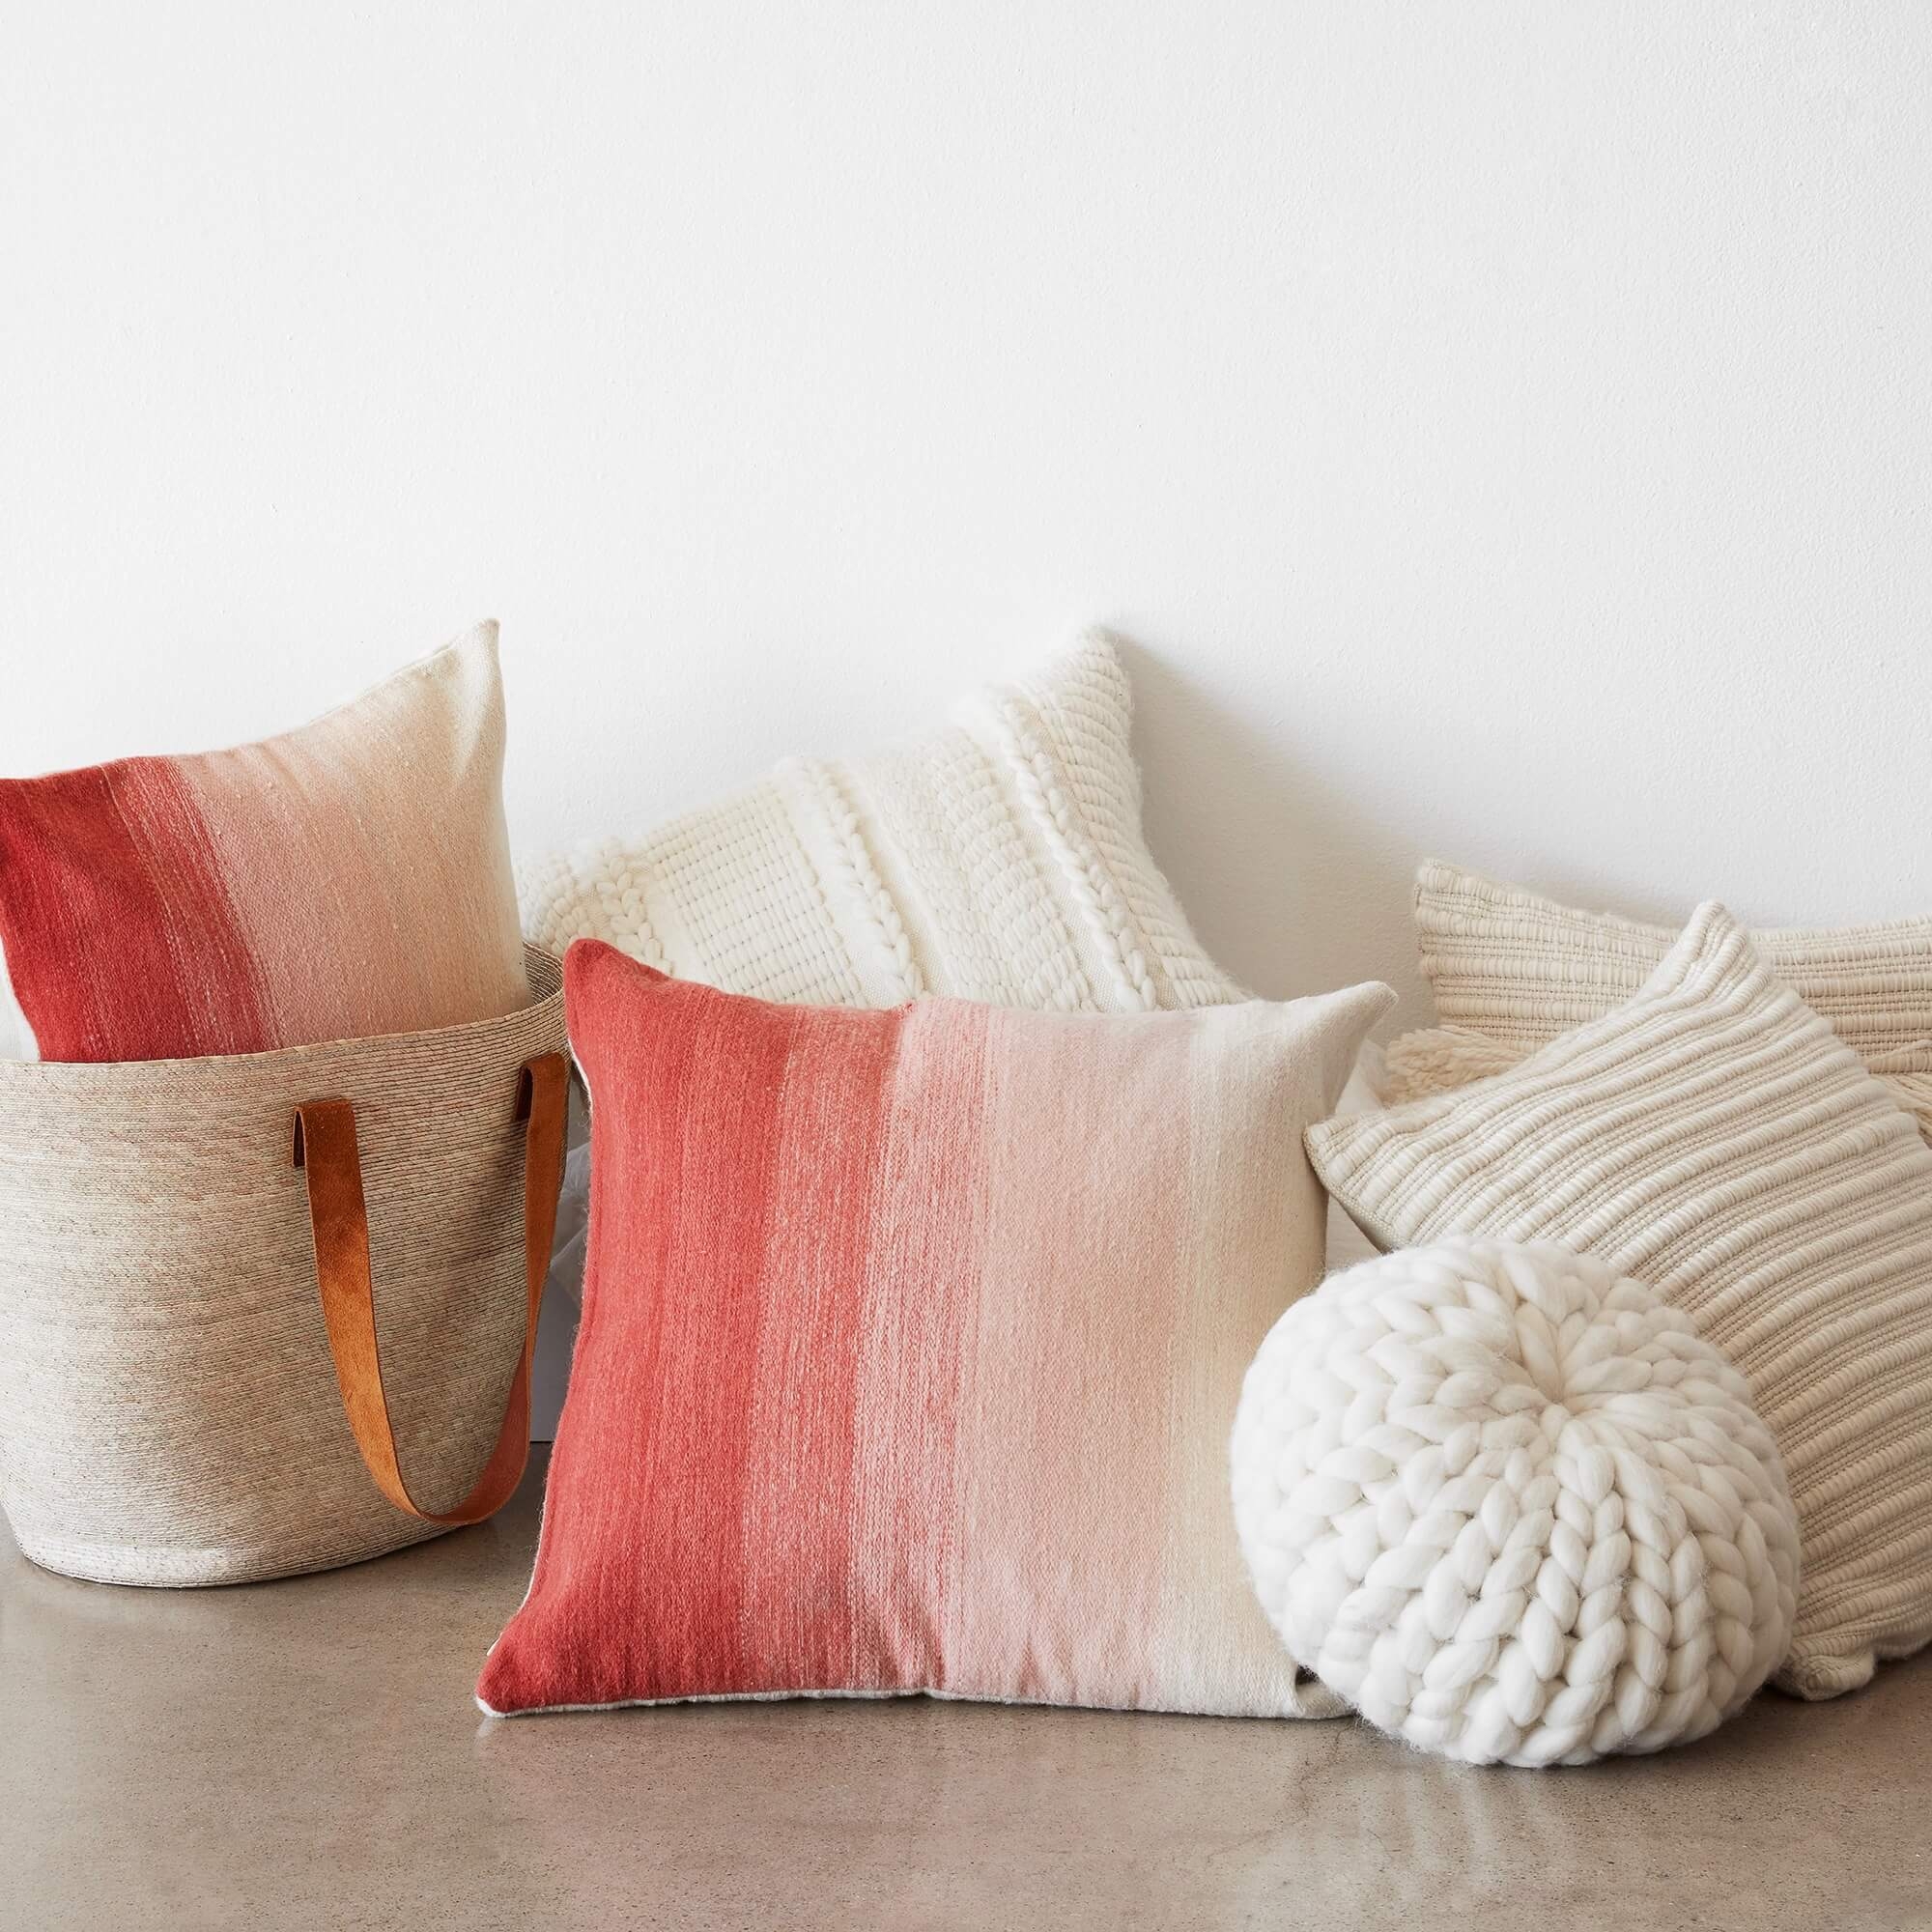 The Citizenry Marea Pillow | 18" x 18" | Made You Blush - Image 6